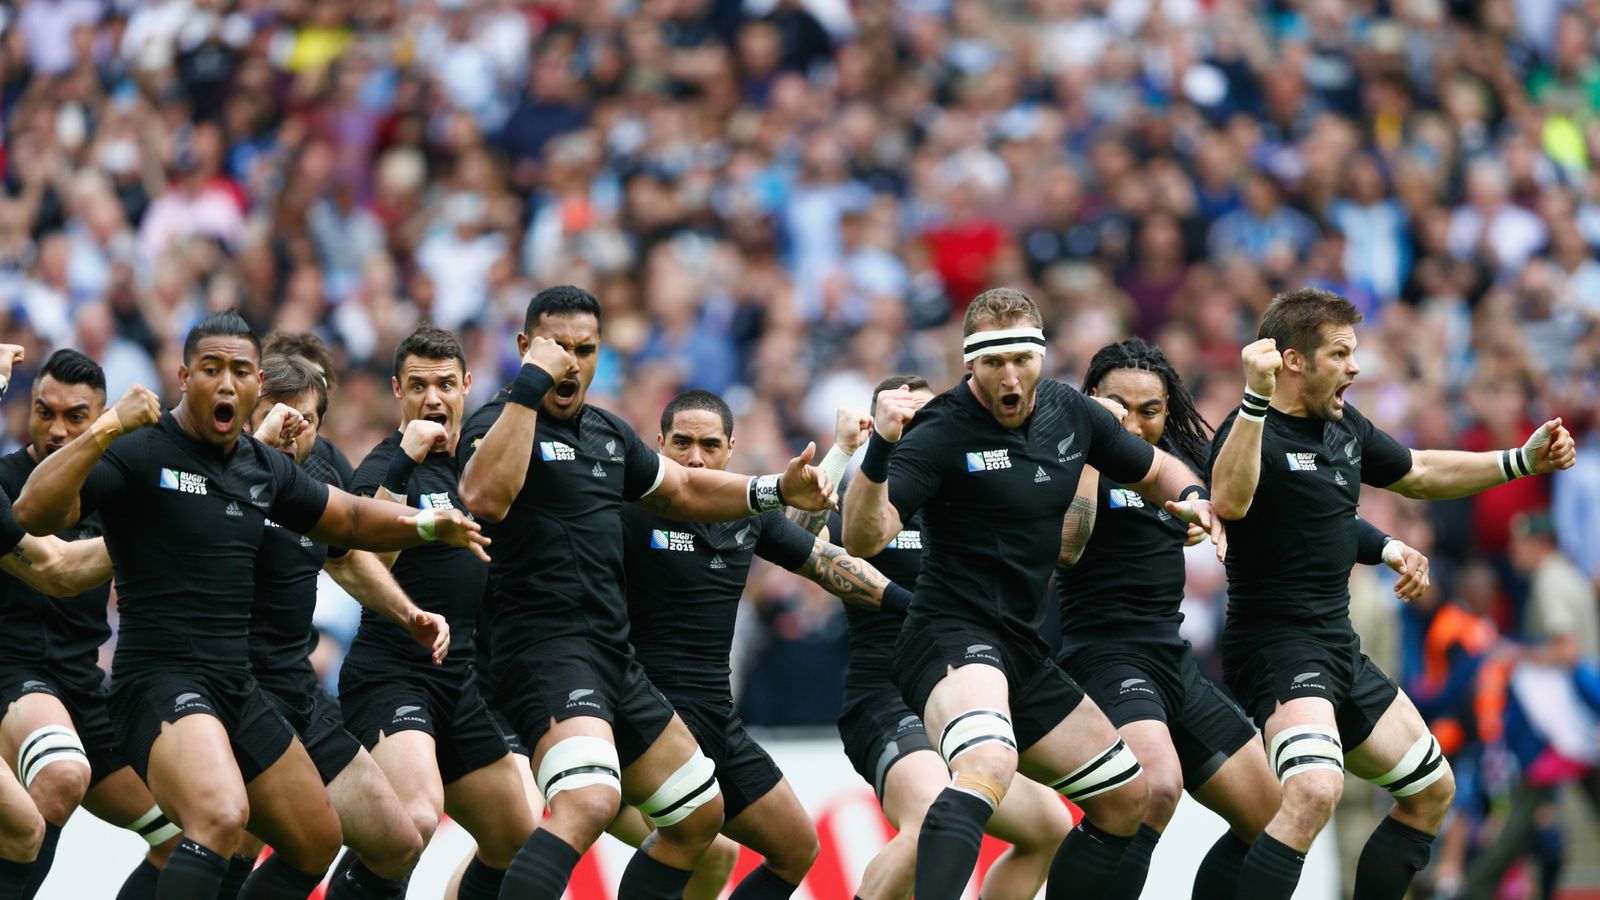 New Zealand lived up to their moniker by wearing their blackest kit